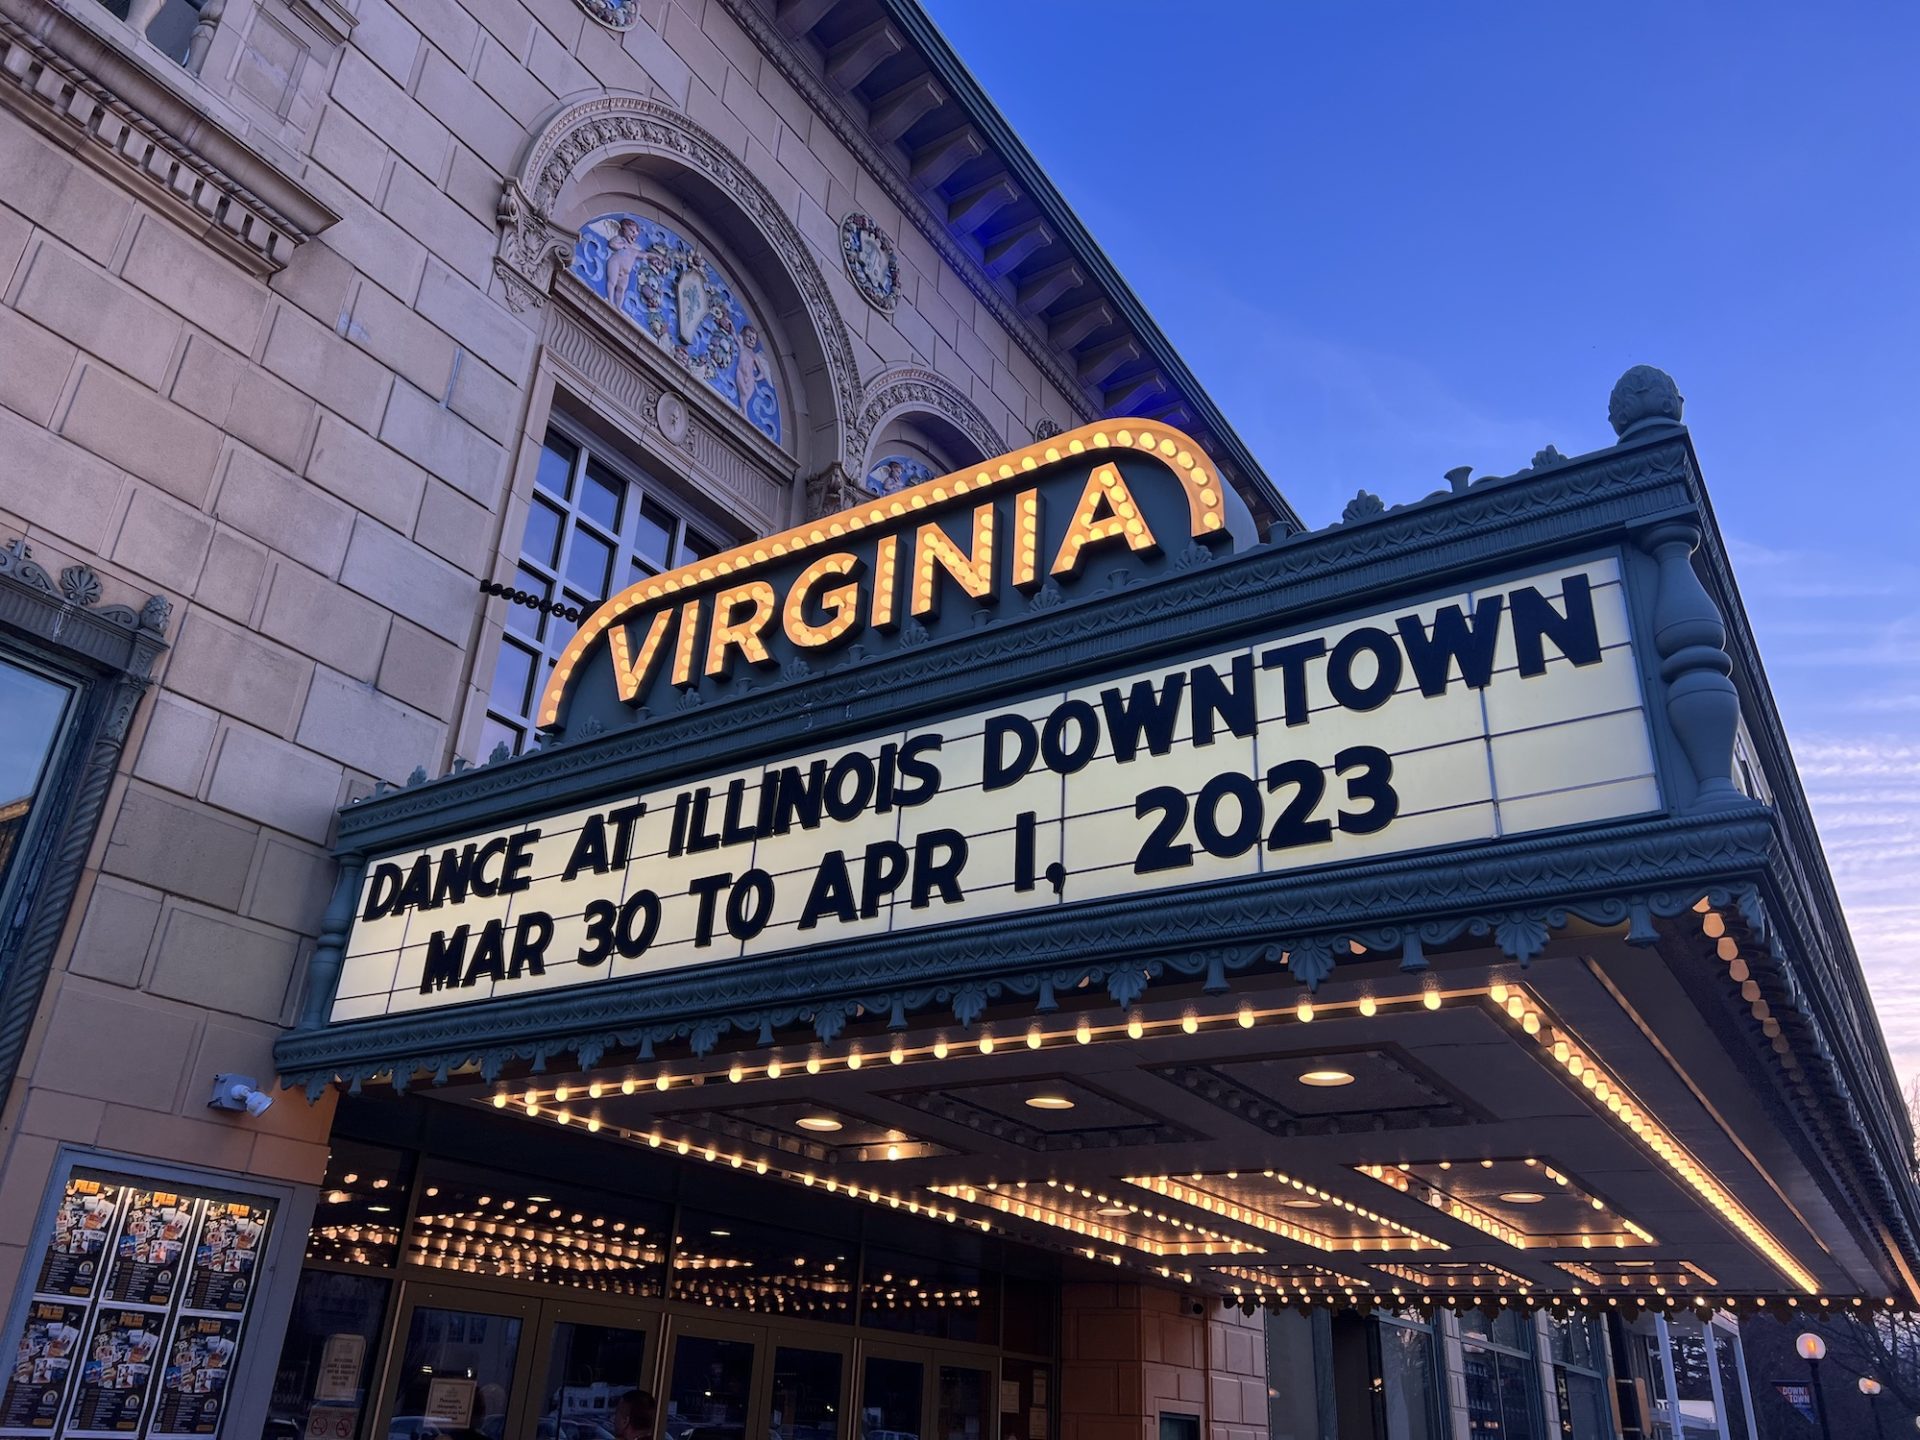 A nighttime view of the Virginia Theatre marquee announcing the Dance at Illinois Downtown show.